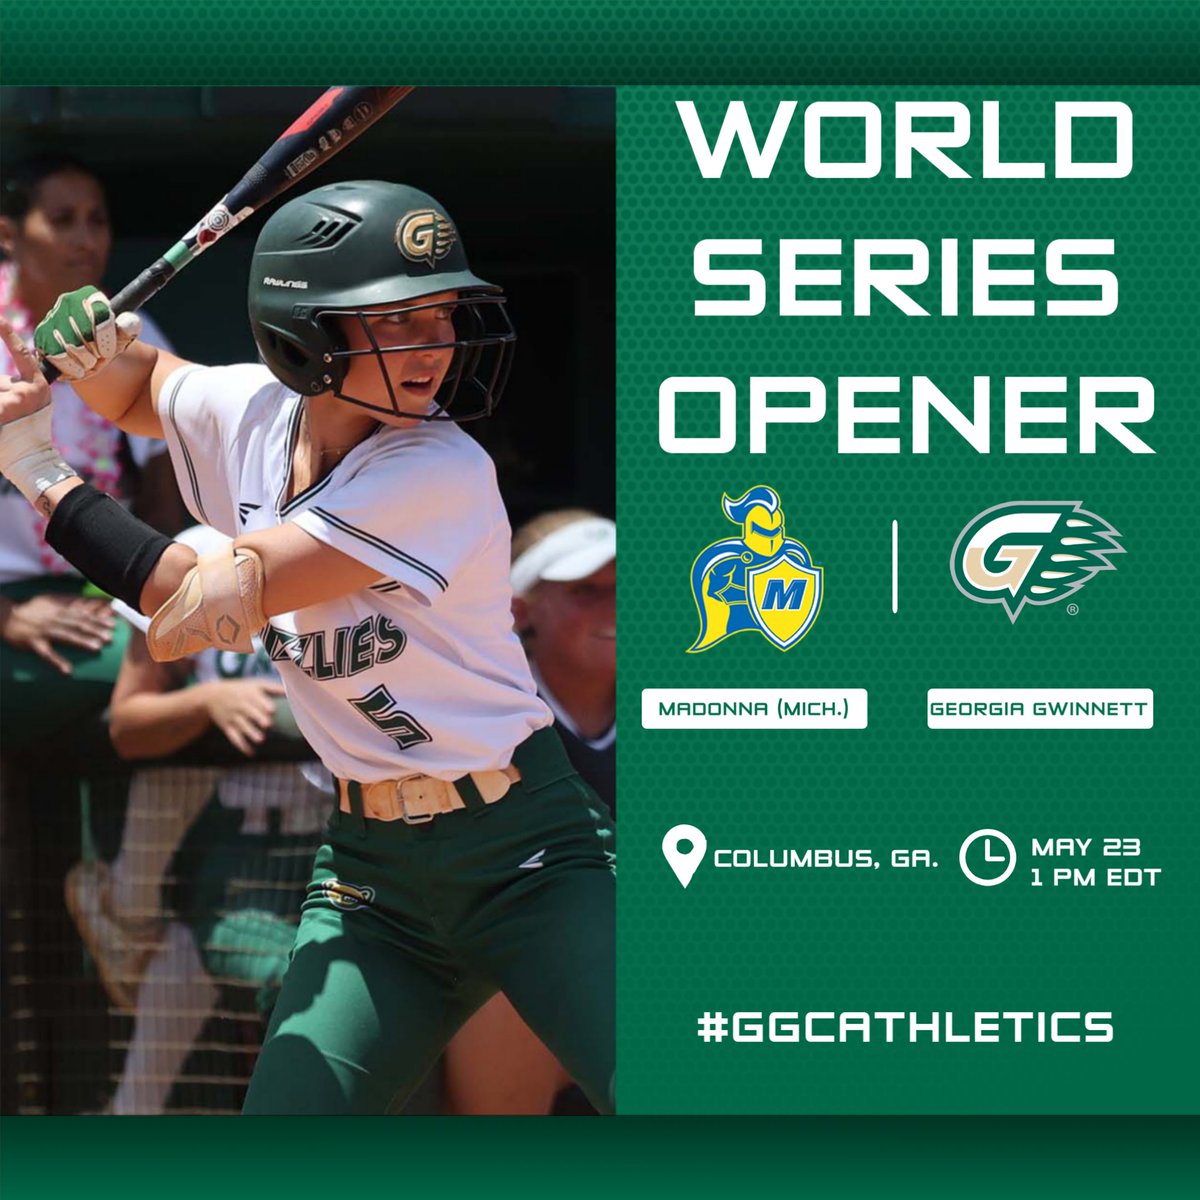 Grizzlies Playing Madonna in Thursday's World Series Opener. GGC is making its fourth trip to the World Series. 📰 - tinyurl.com/mshtehmk #GGCAthletics